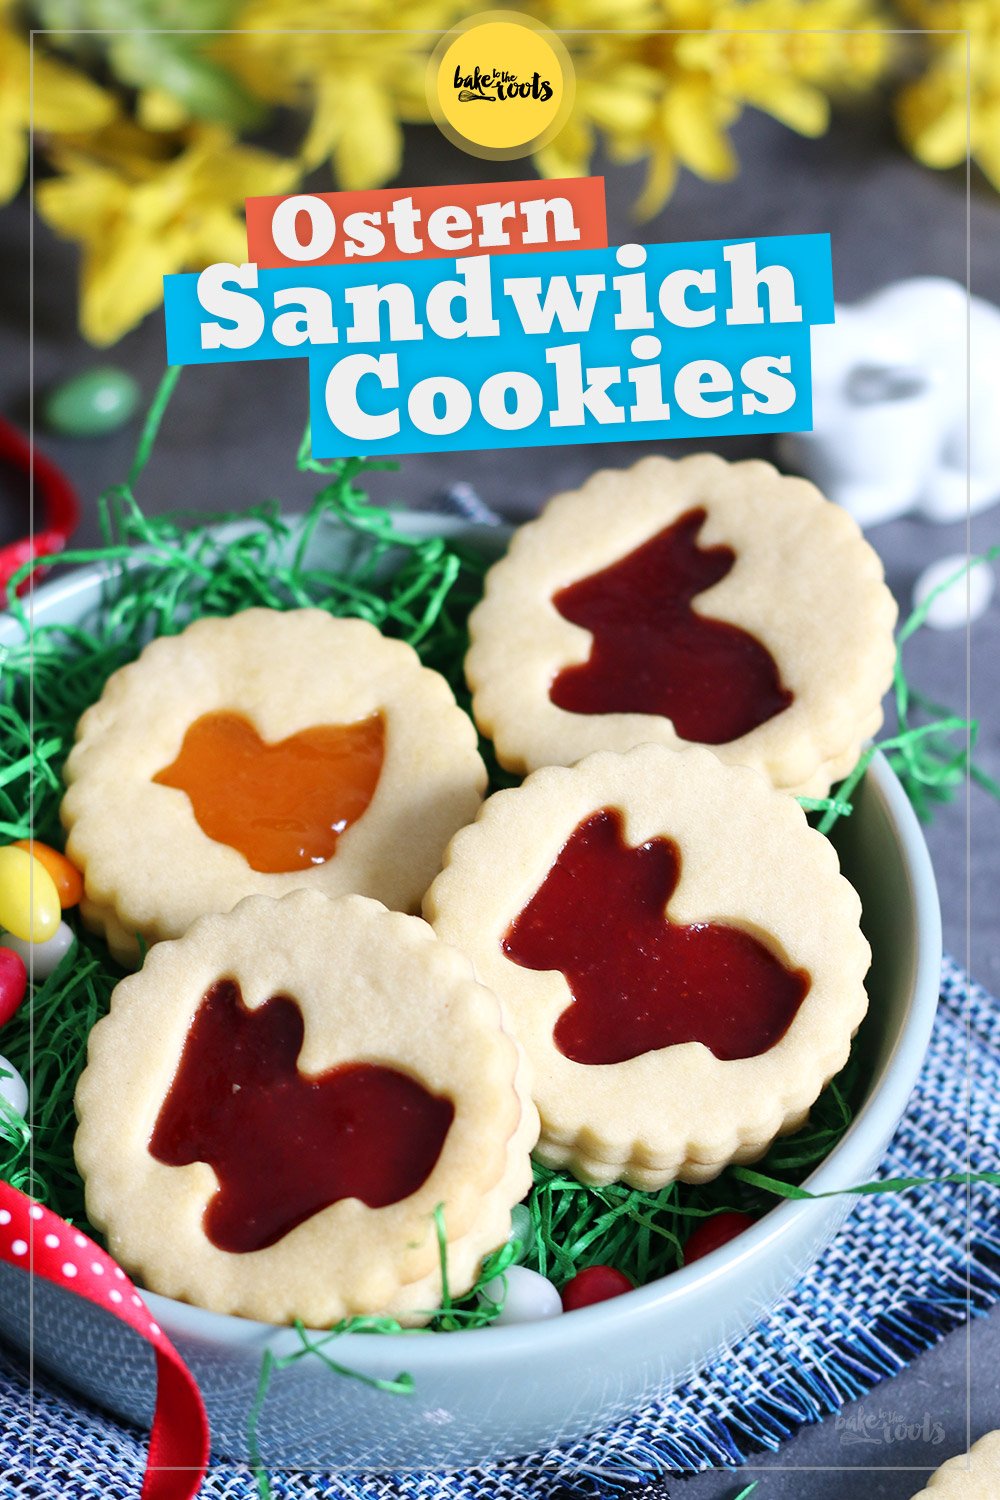 Ostern Sandwich Cookies | Bake to the roots